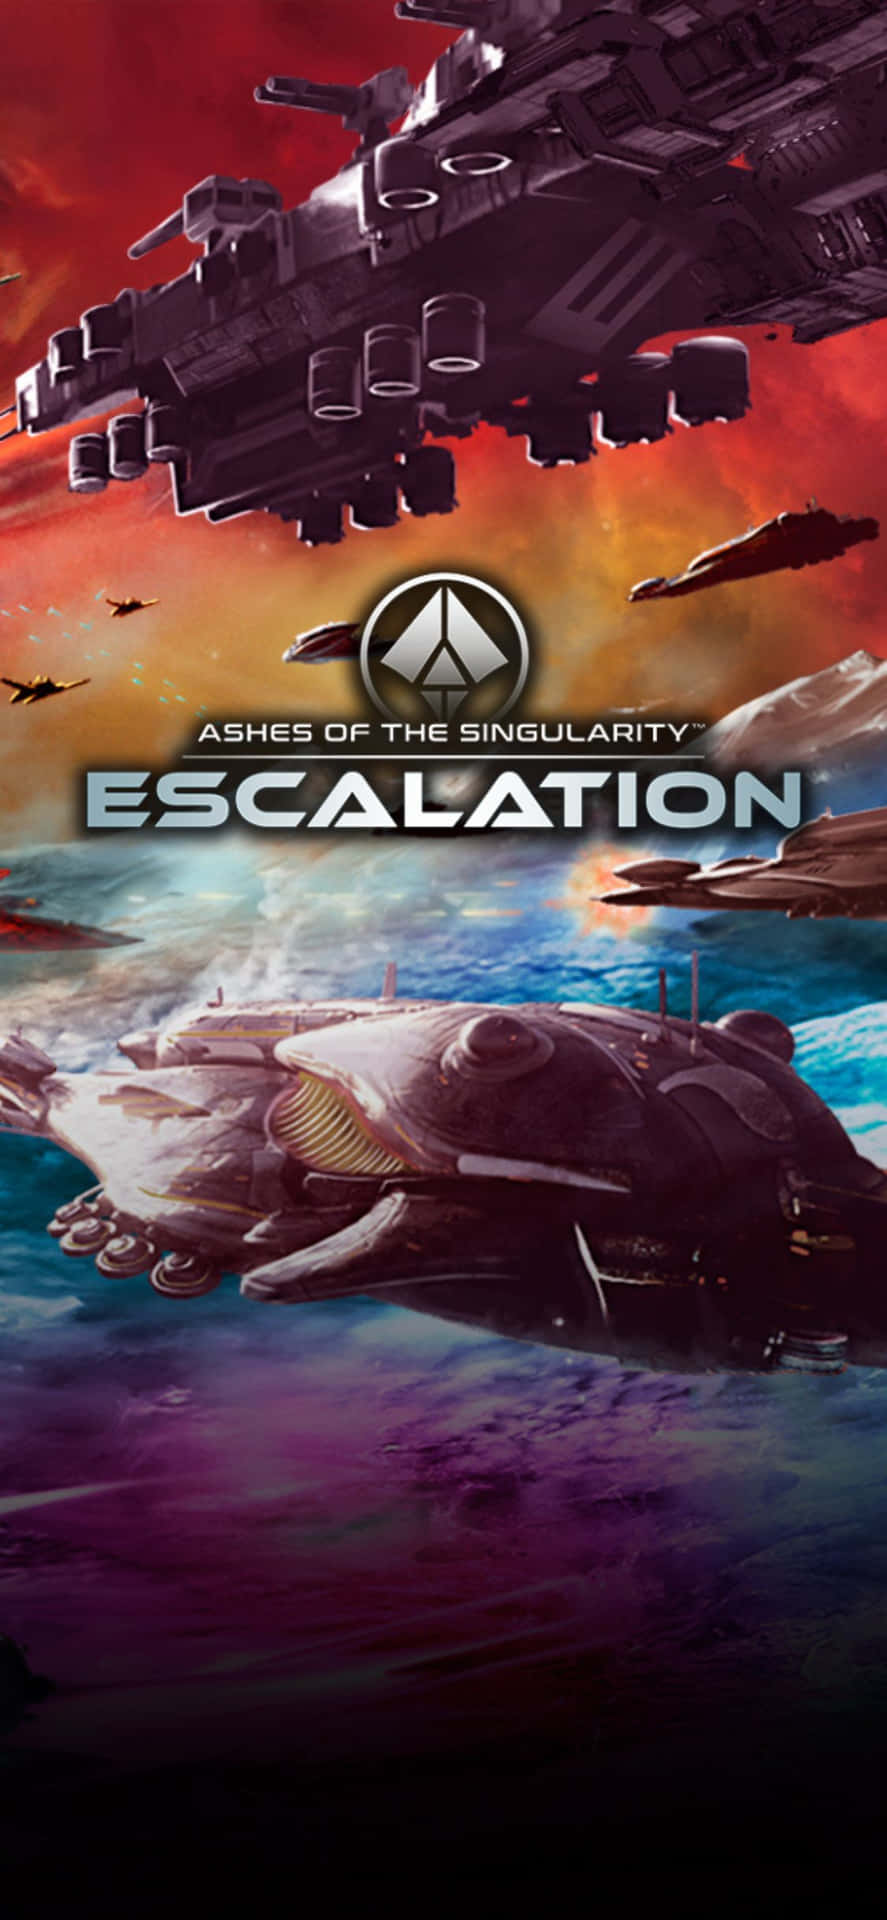 Take command of your destiny with the Iphone X and Ashes Of The Singularity Escalation